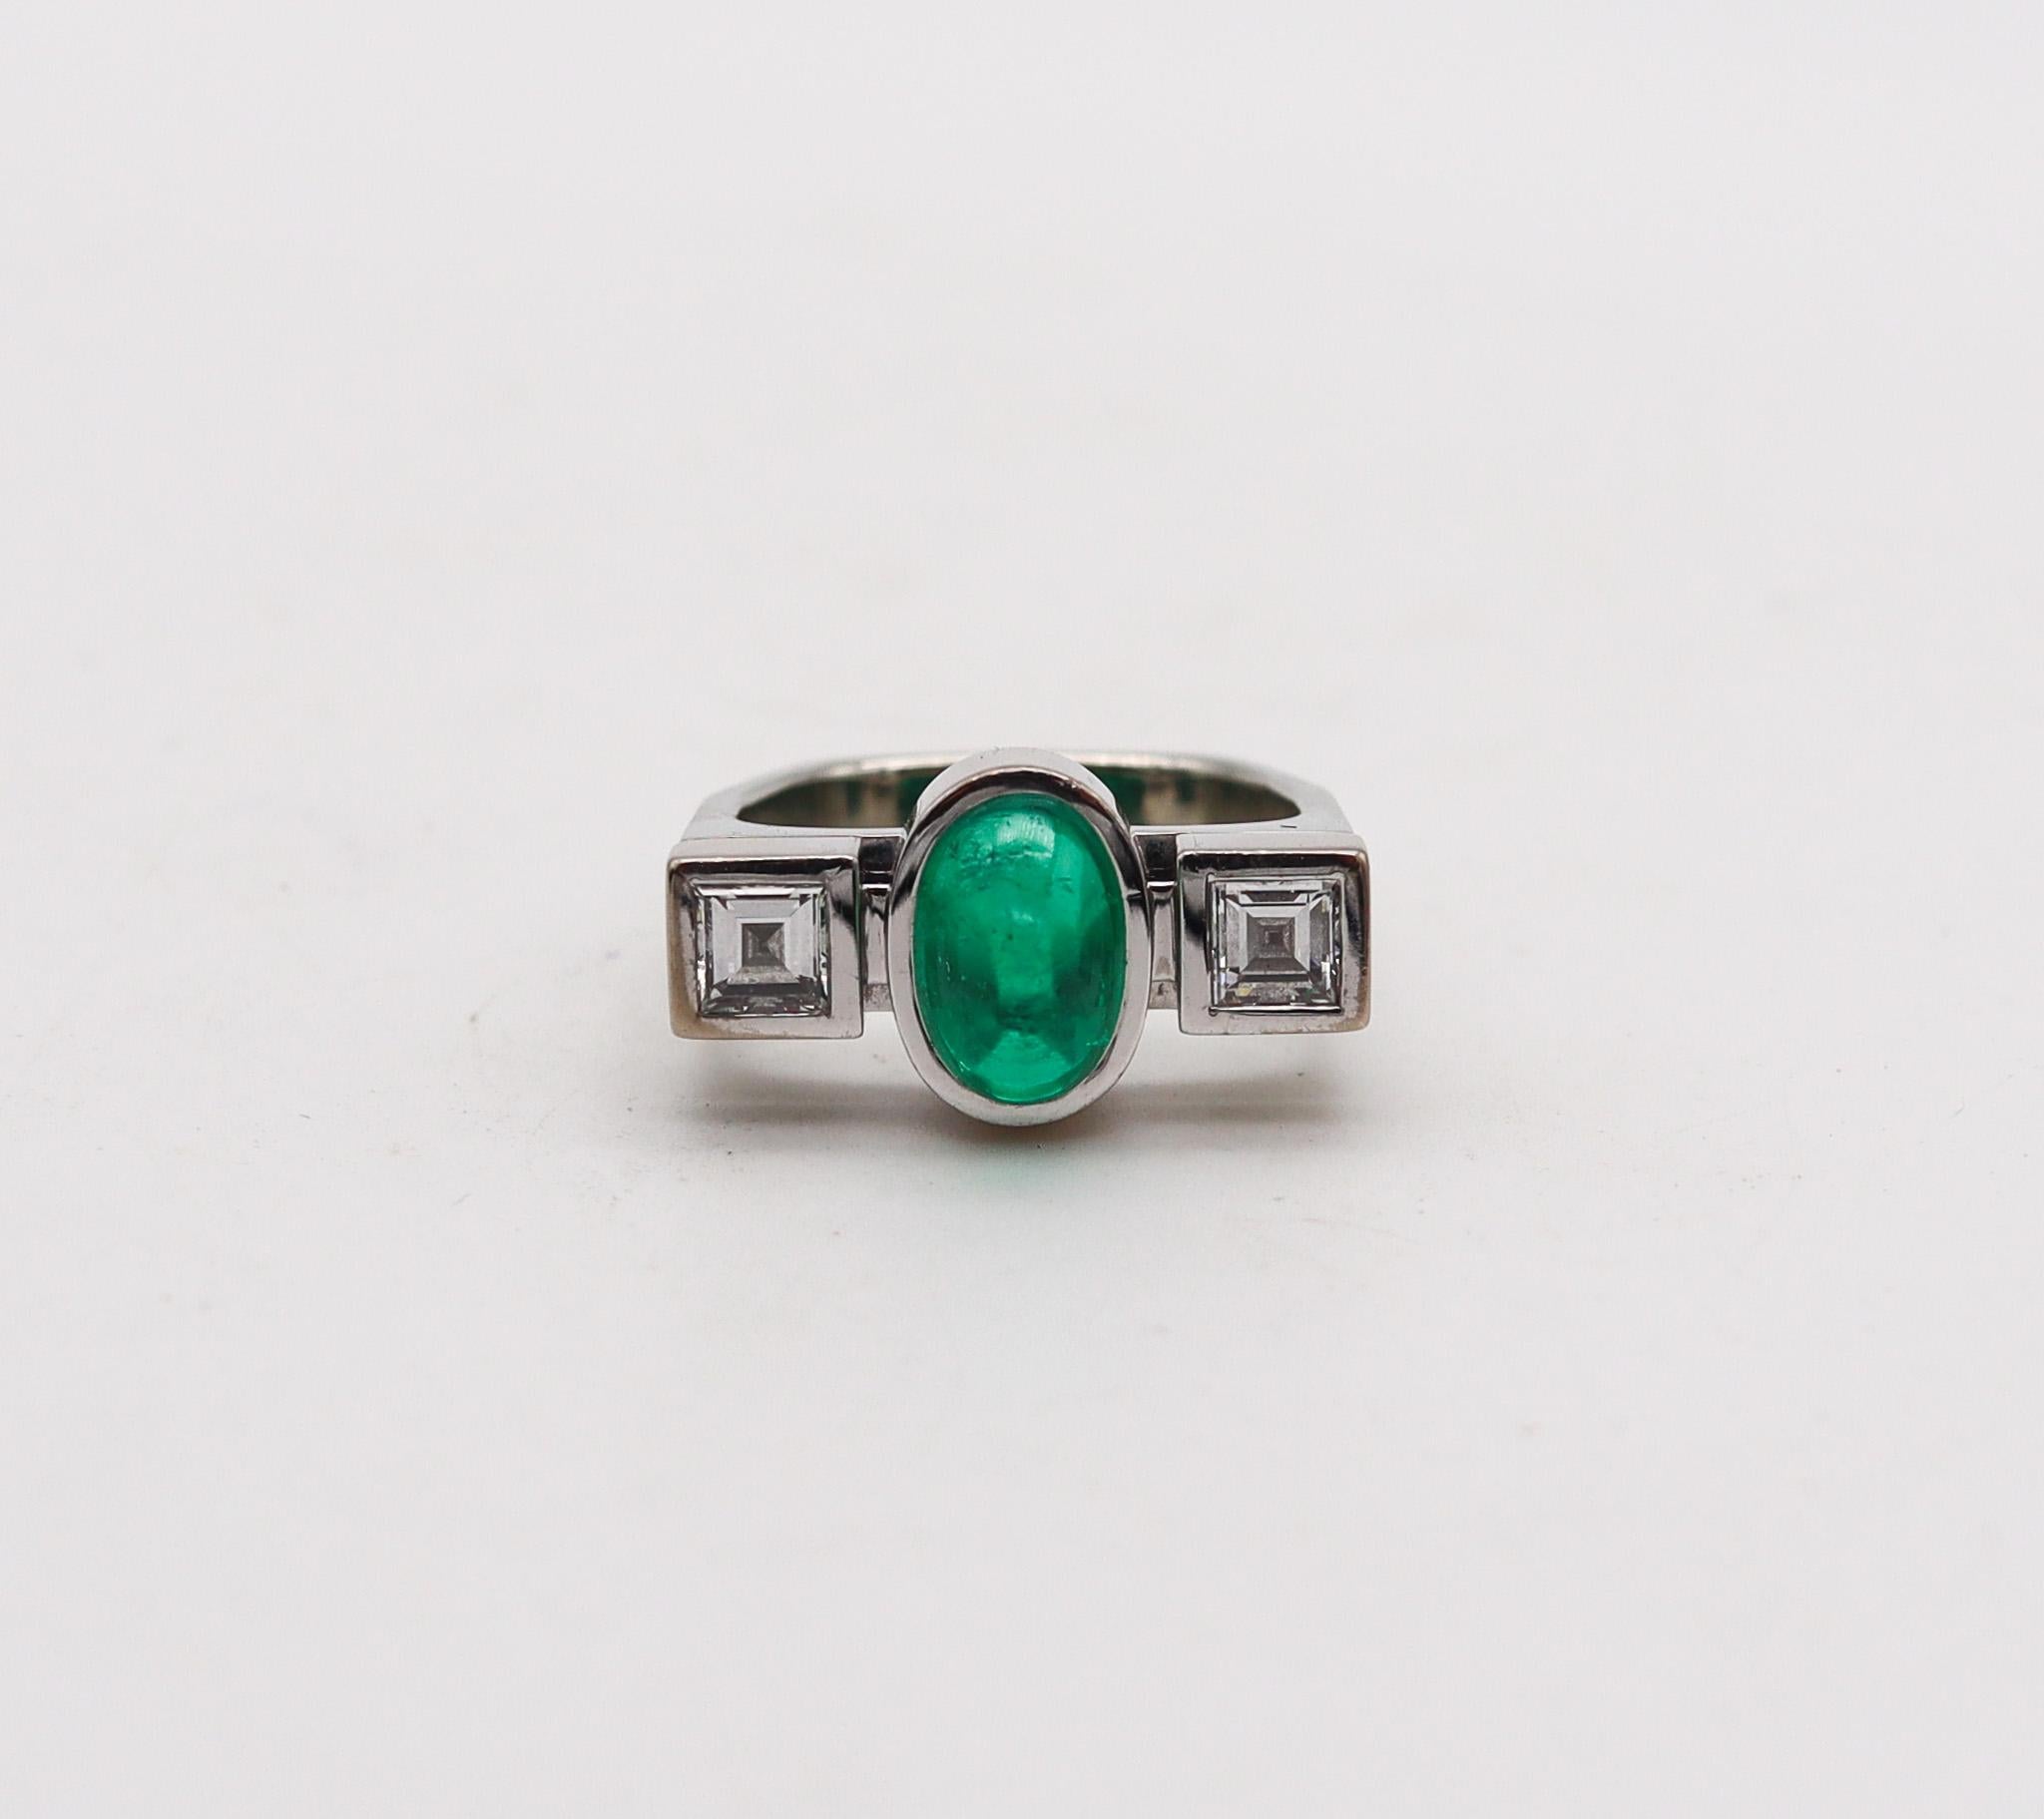 Cabochon Trudel By Kurt Aepli Geometric Ring 18Kt Gold With 3.02 Ctw Emerald And Diamonds For Sale